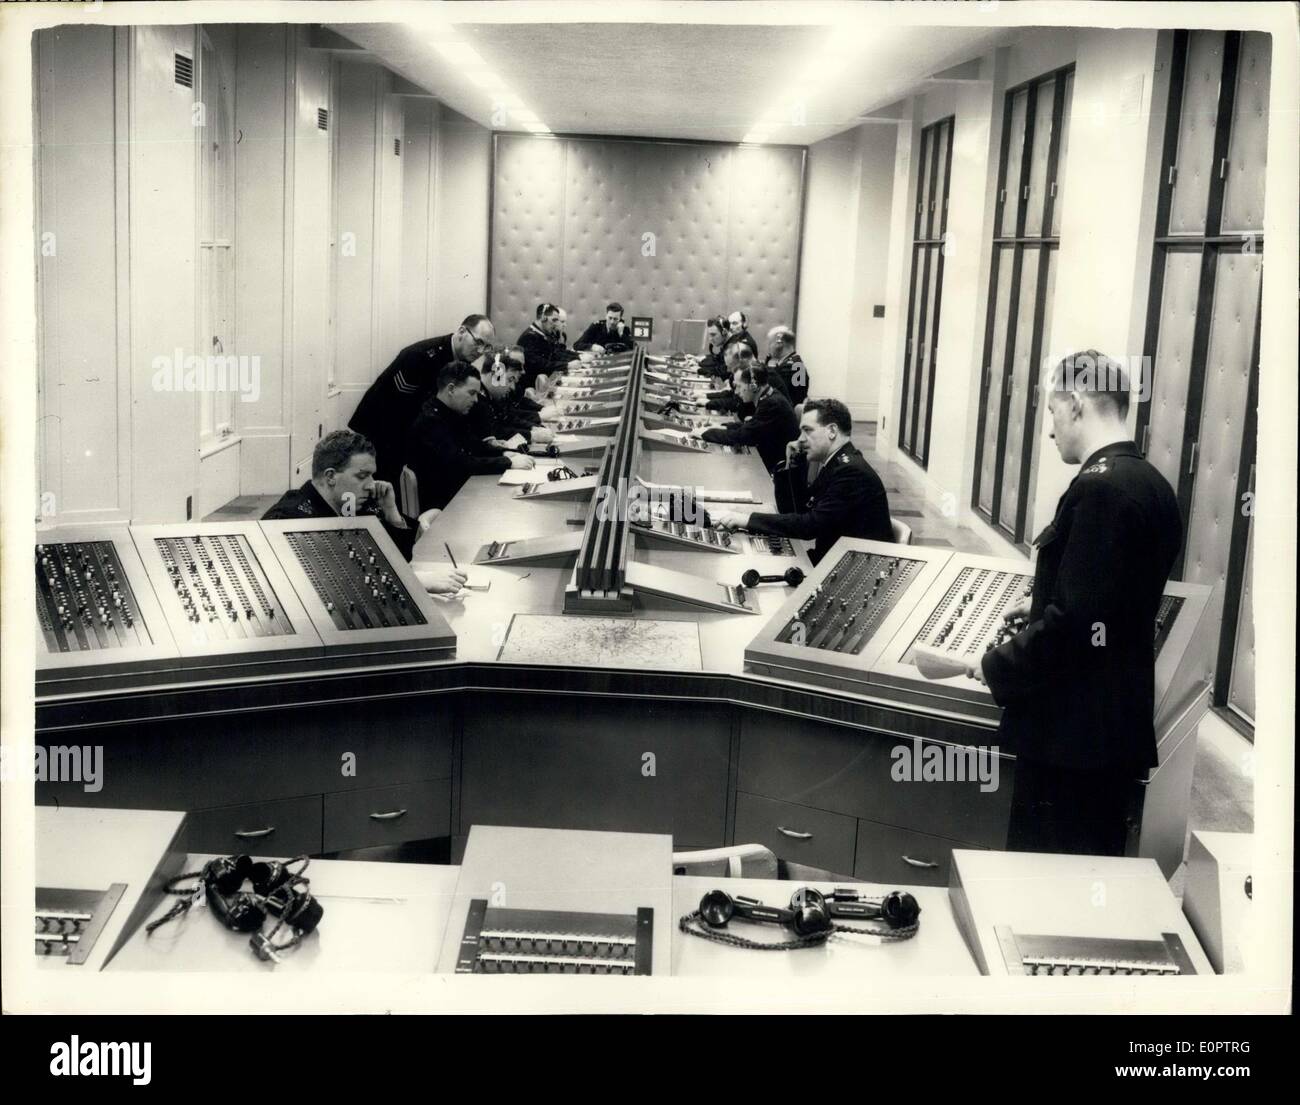 Dec. 29, 1956 - Scotland Yard's New Information Room: Scotland Yard's new Information Room has been designed to meet the great increase in 999 calls and to accommodate the new mechanically and electrically aided system of working now to be employed. It deals with incidents in the whole of the Metropolitan and City Police districts - an area of 736 square miles and a population o 81/2 million. The Information Room is a clearing centre where information about matters requiring police attention is received and distributed Stock Photo